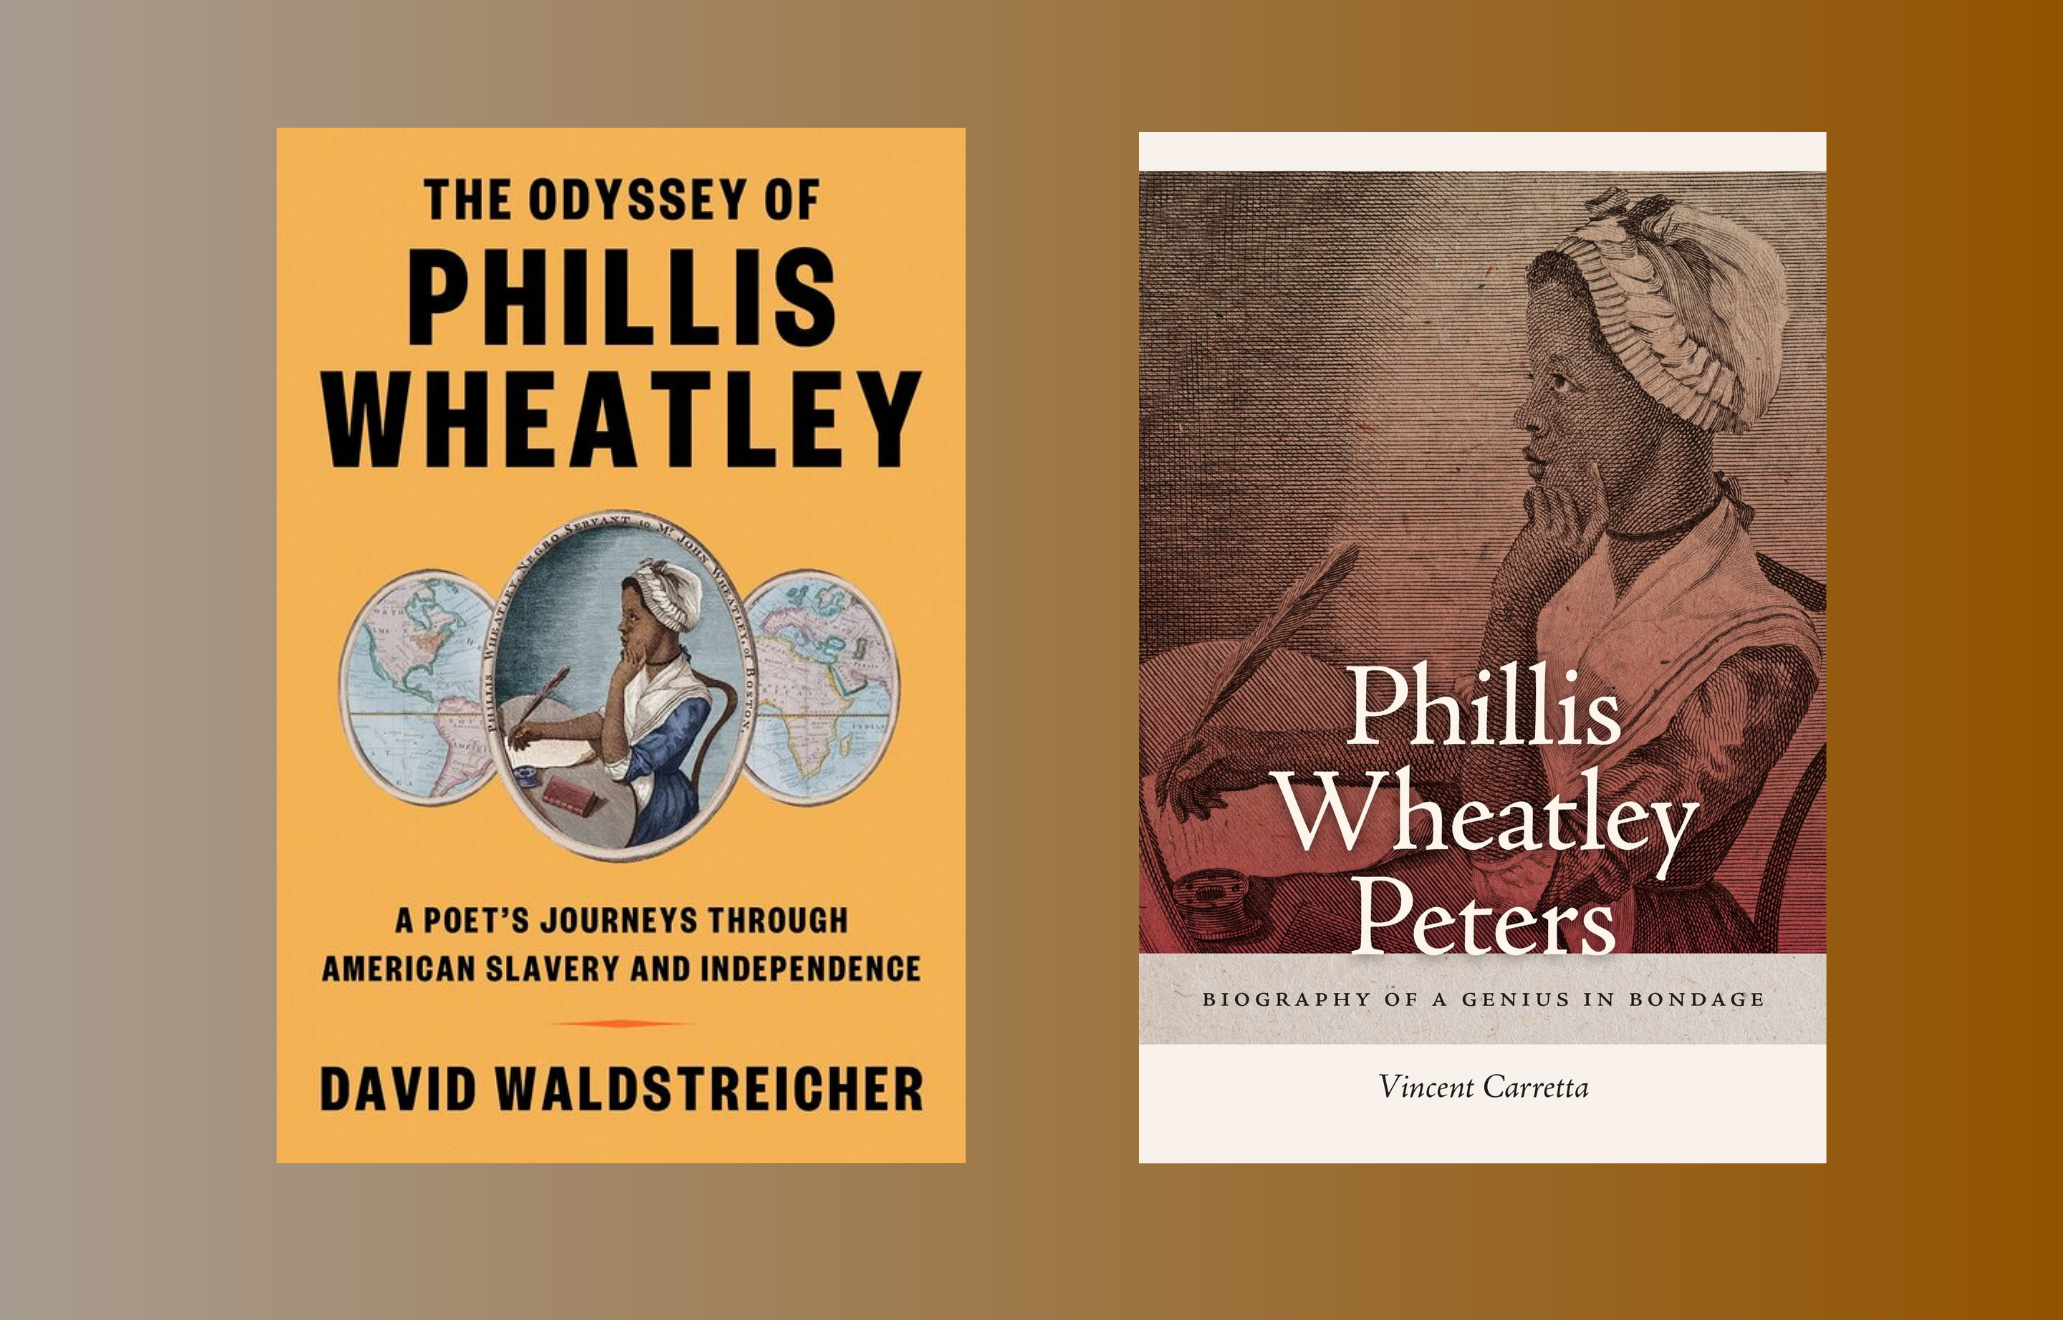 Poetry, Biography, and the Unknowable: On Two New Books About Phillis Wheatley